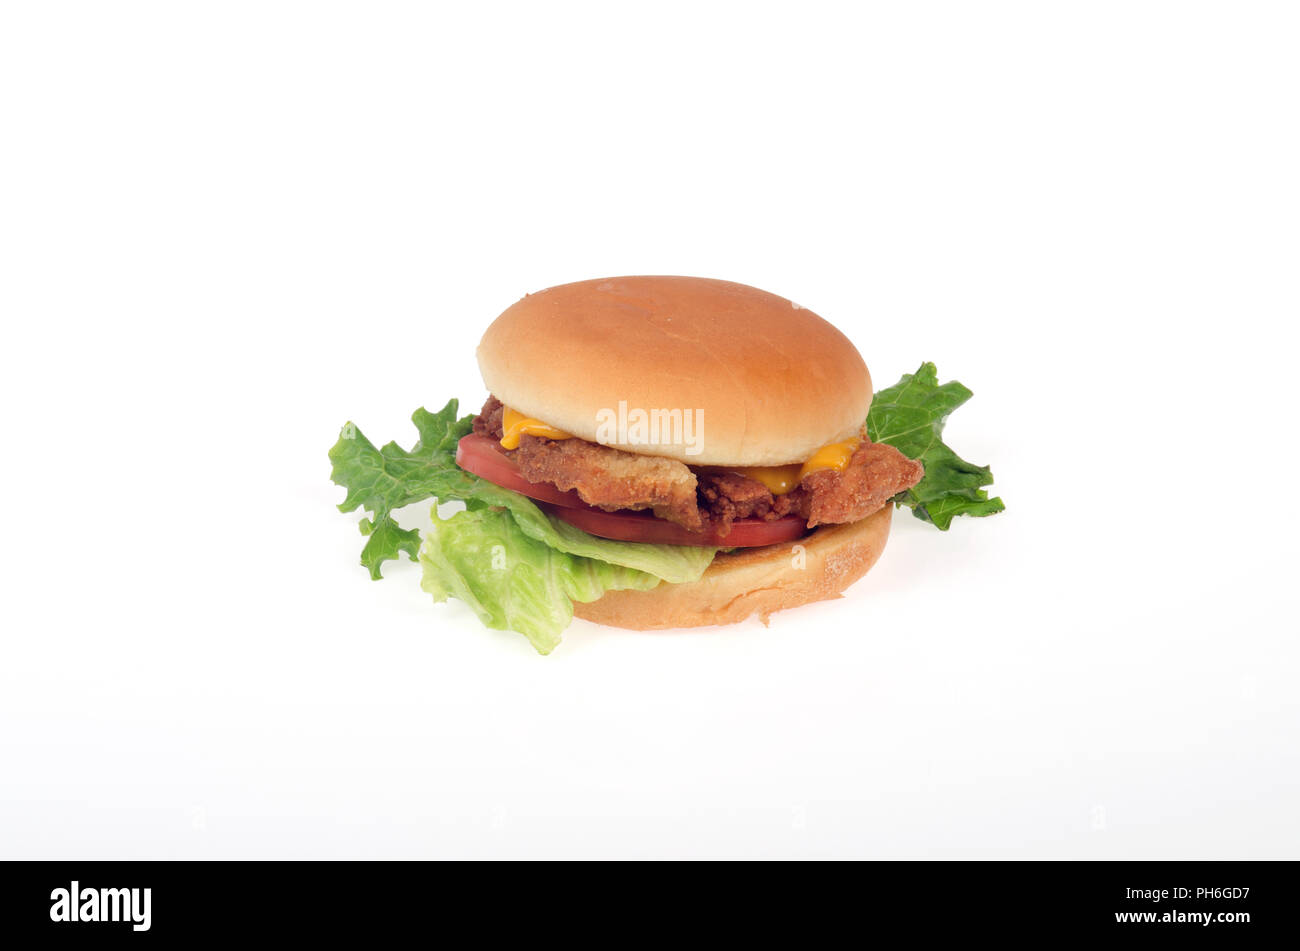 Chick-Fil-A Chicken fillet sandwich with lettuce, tomato and yellow cheese in a roll or bun on white background Stock Photo